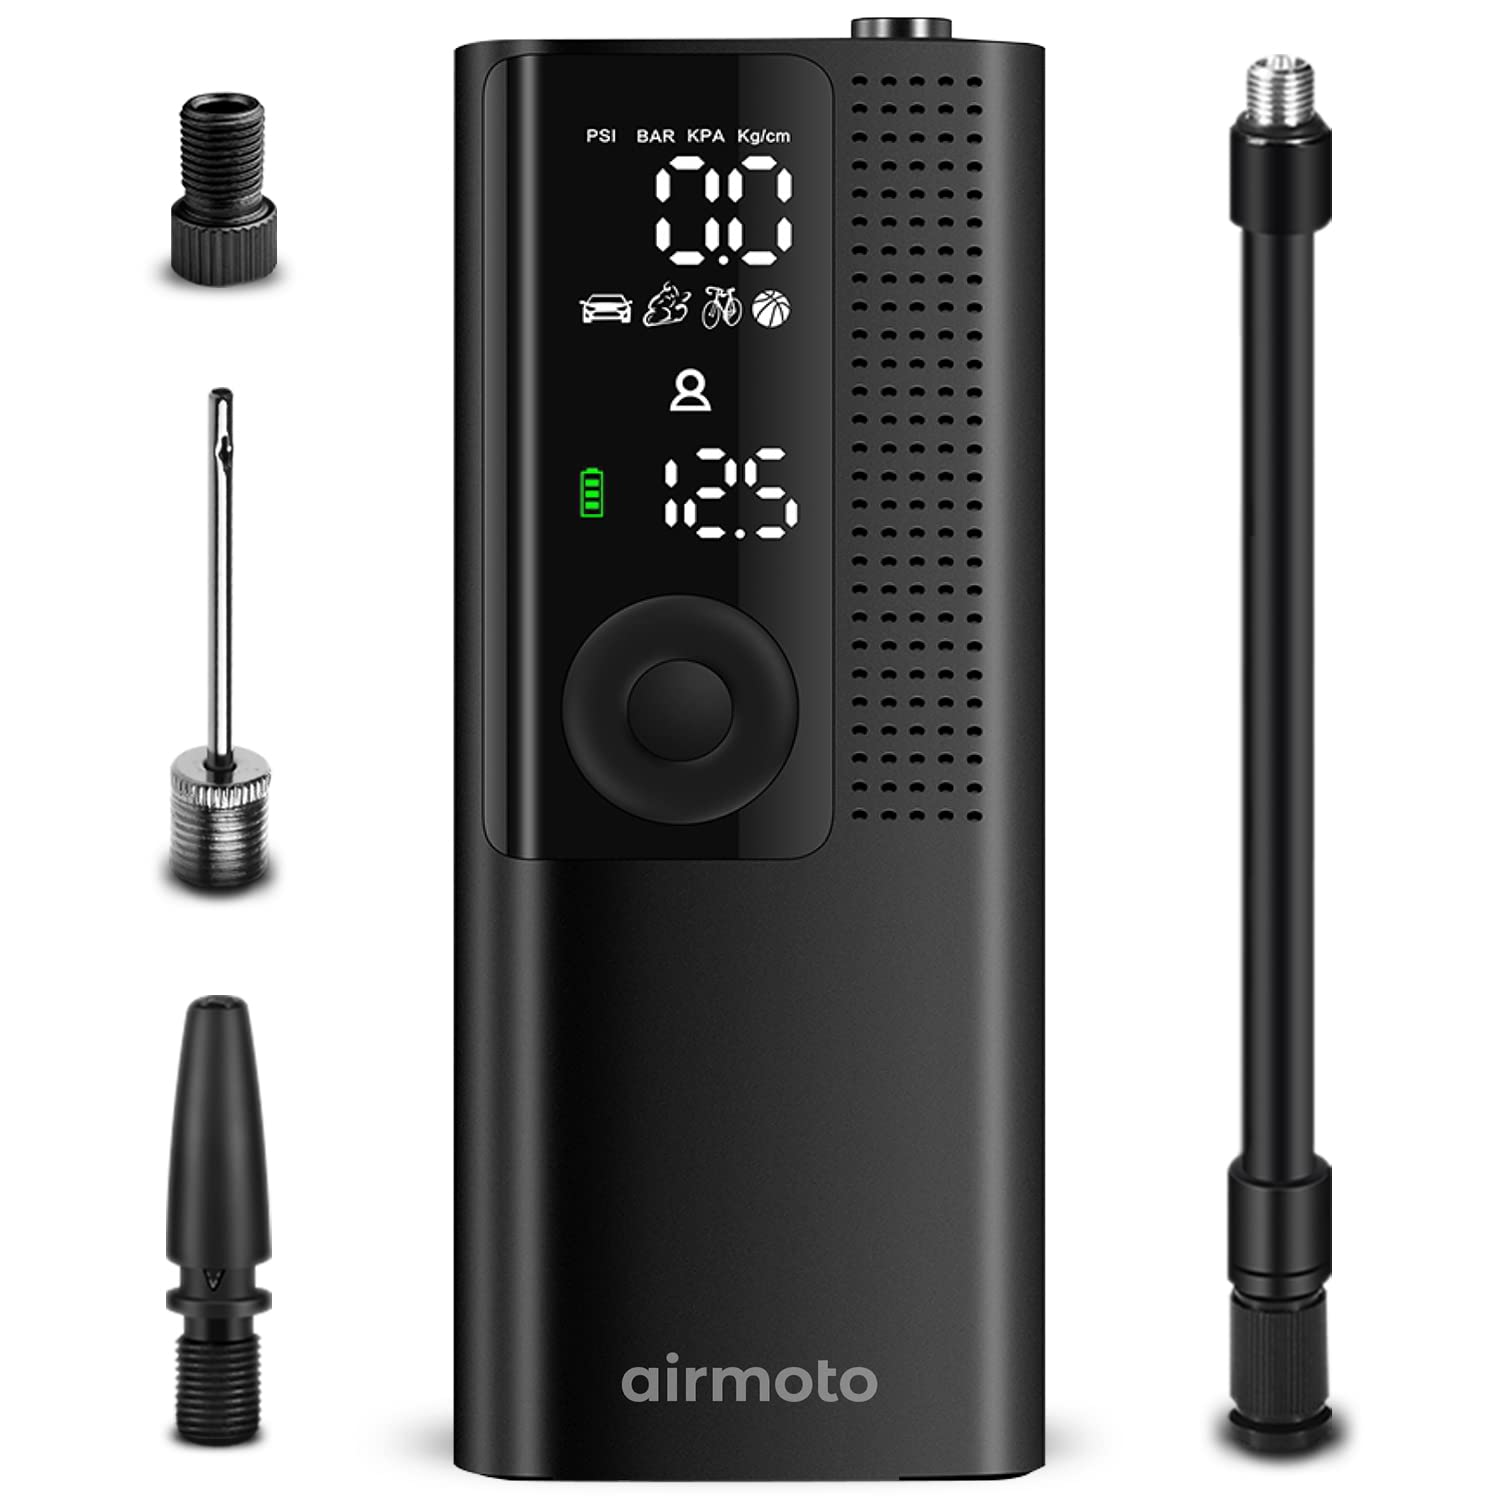 Airmoto Tire Inflator Portable Air Compressor - Air Pump for Car Tires w/Digital Tire Pressure Gauge - Air Compressor for Car (120 PSI) - Motorcycle, Electric Bike Pump and Bicycle Pump w/LED Light